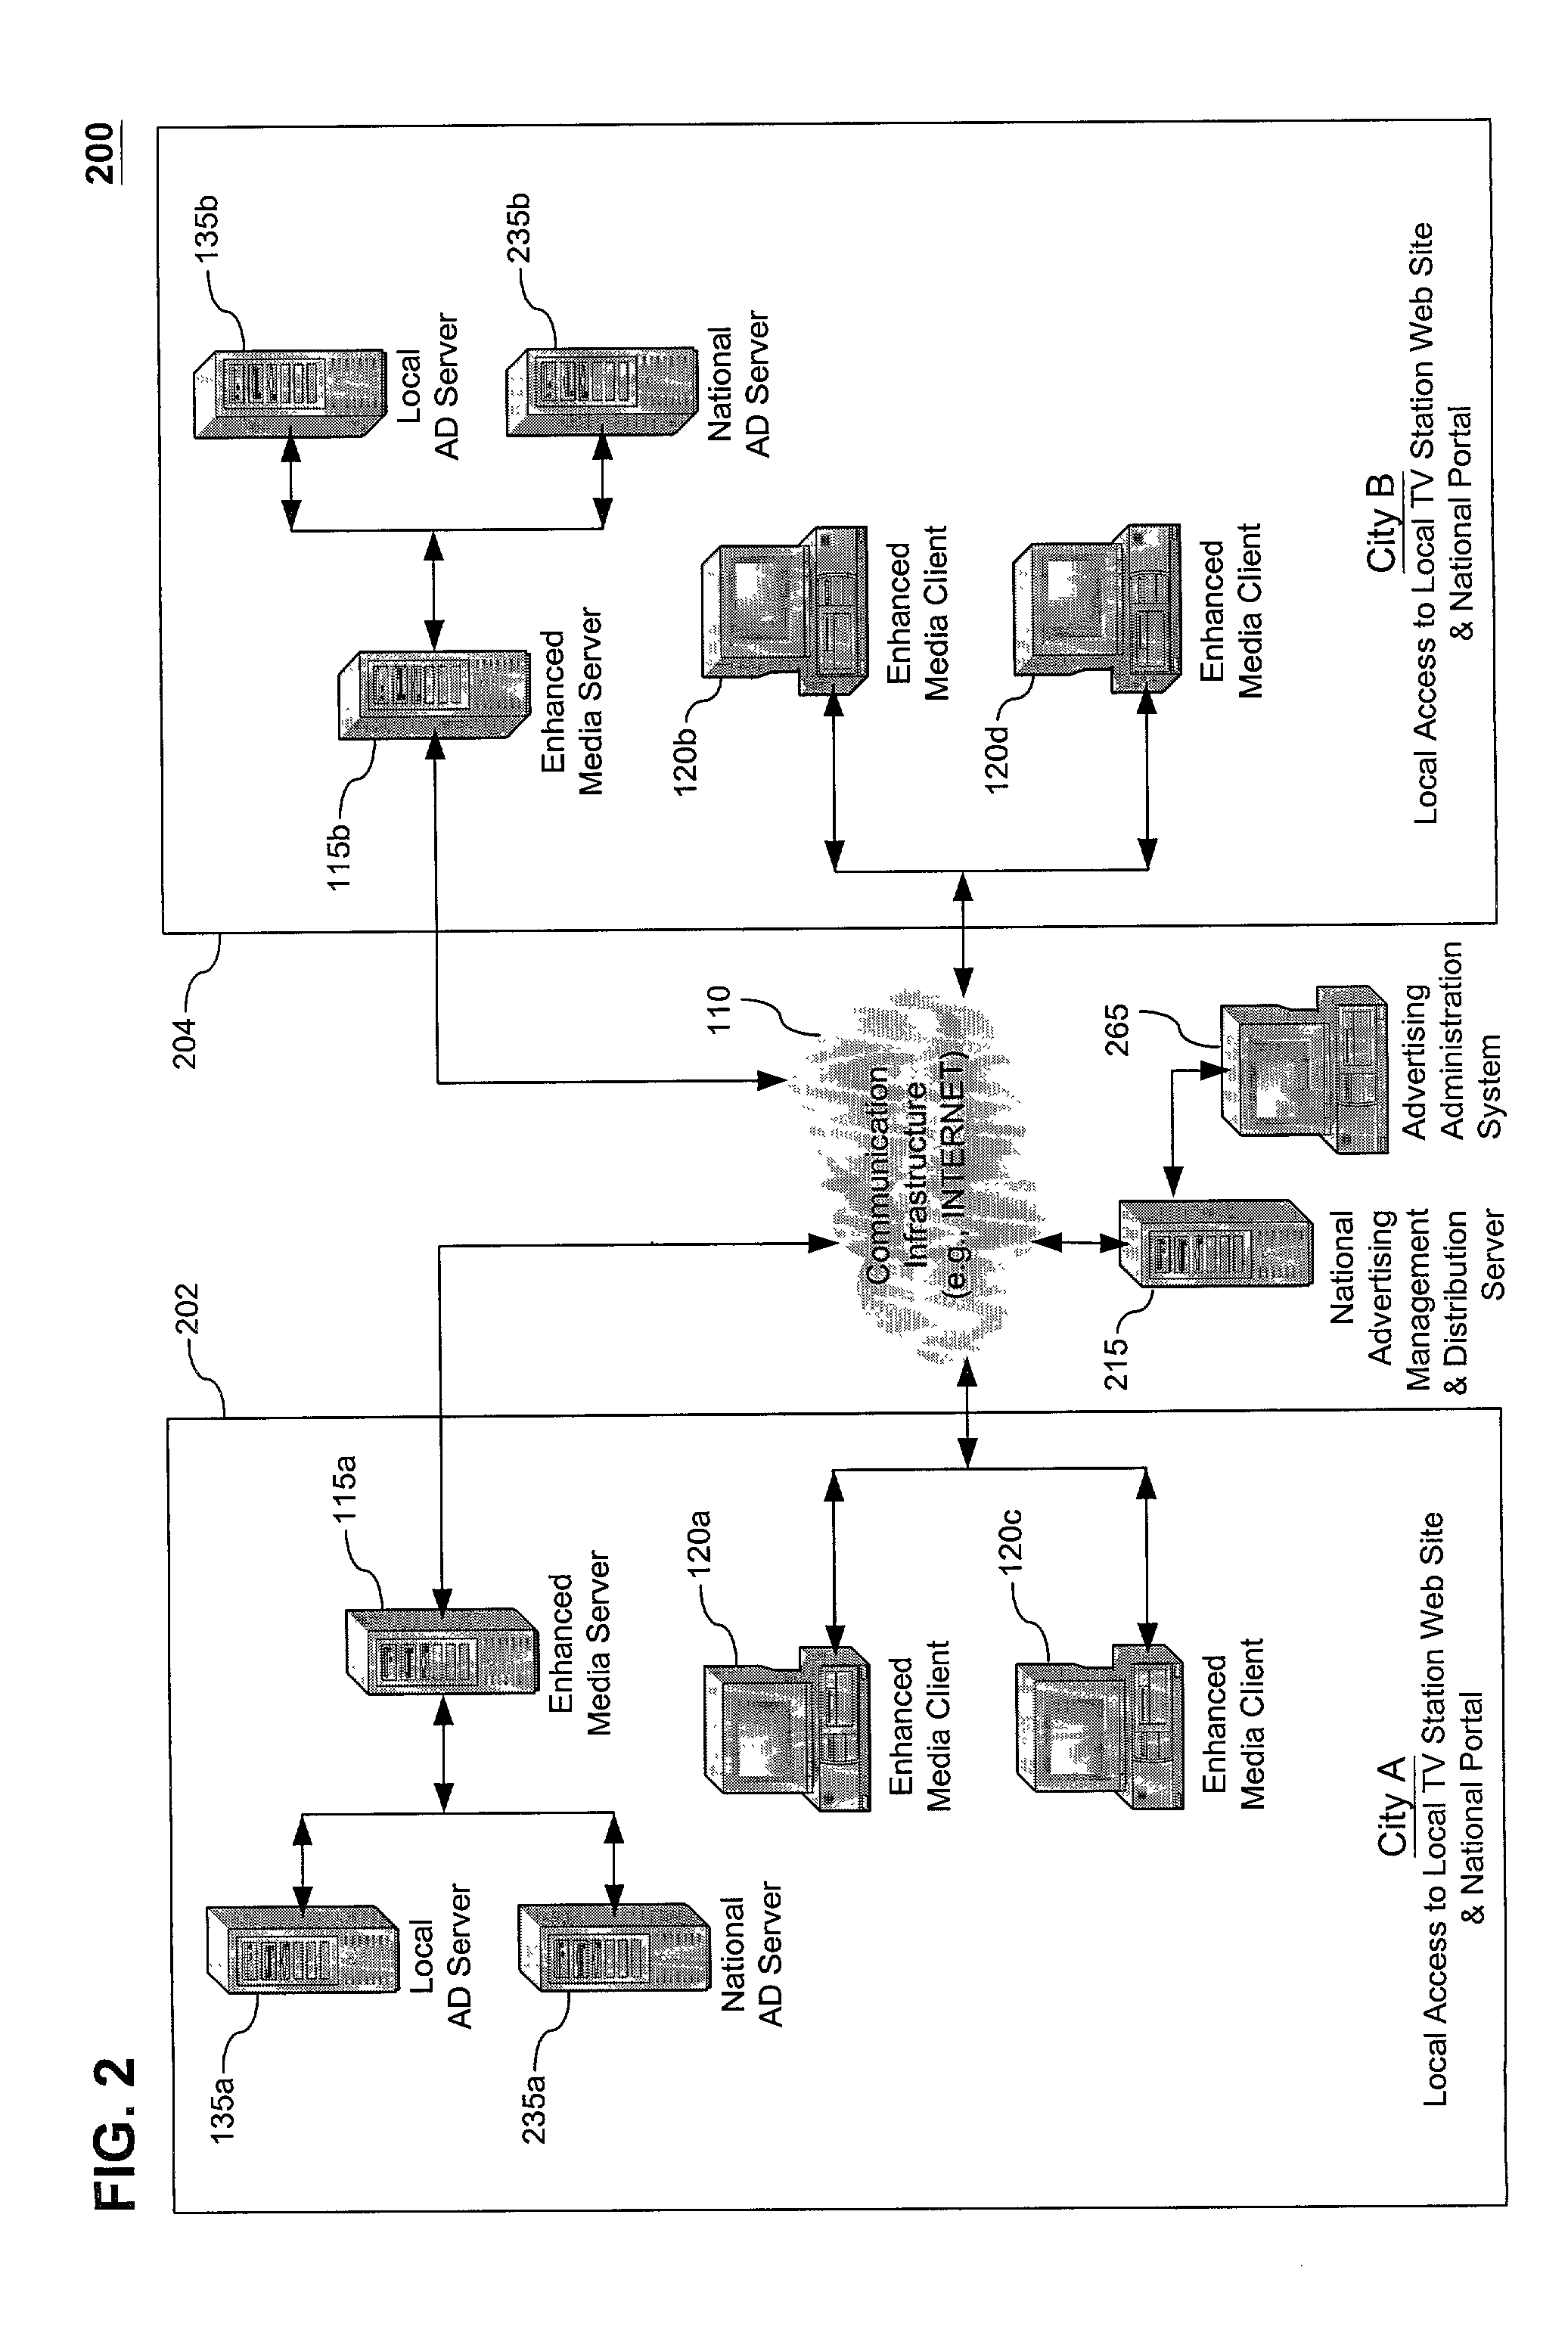 Method, system and computer program product for producing and distributing enhanced media downstreams